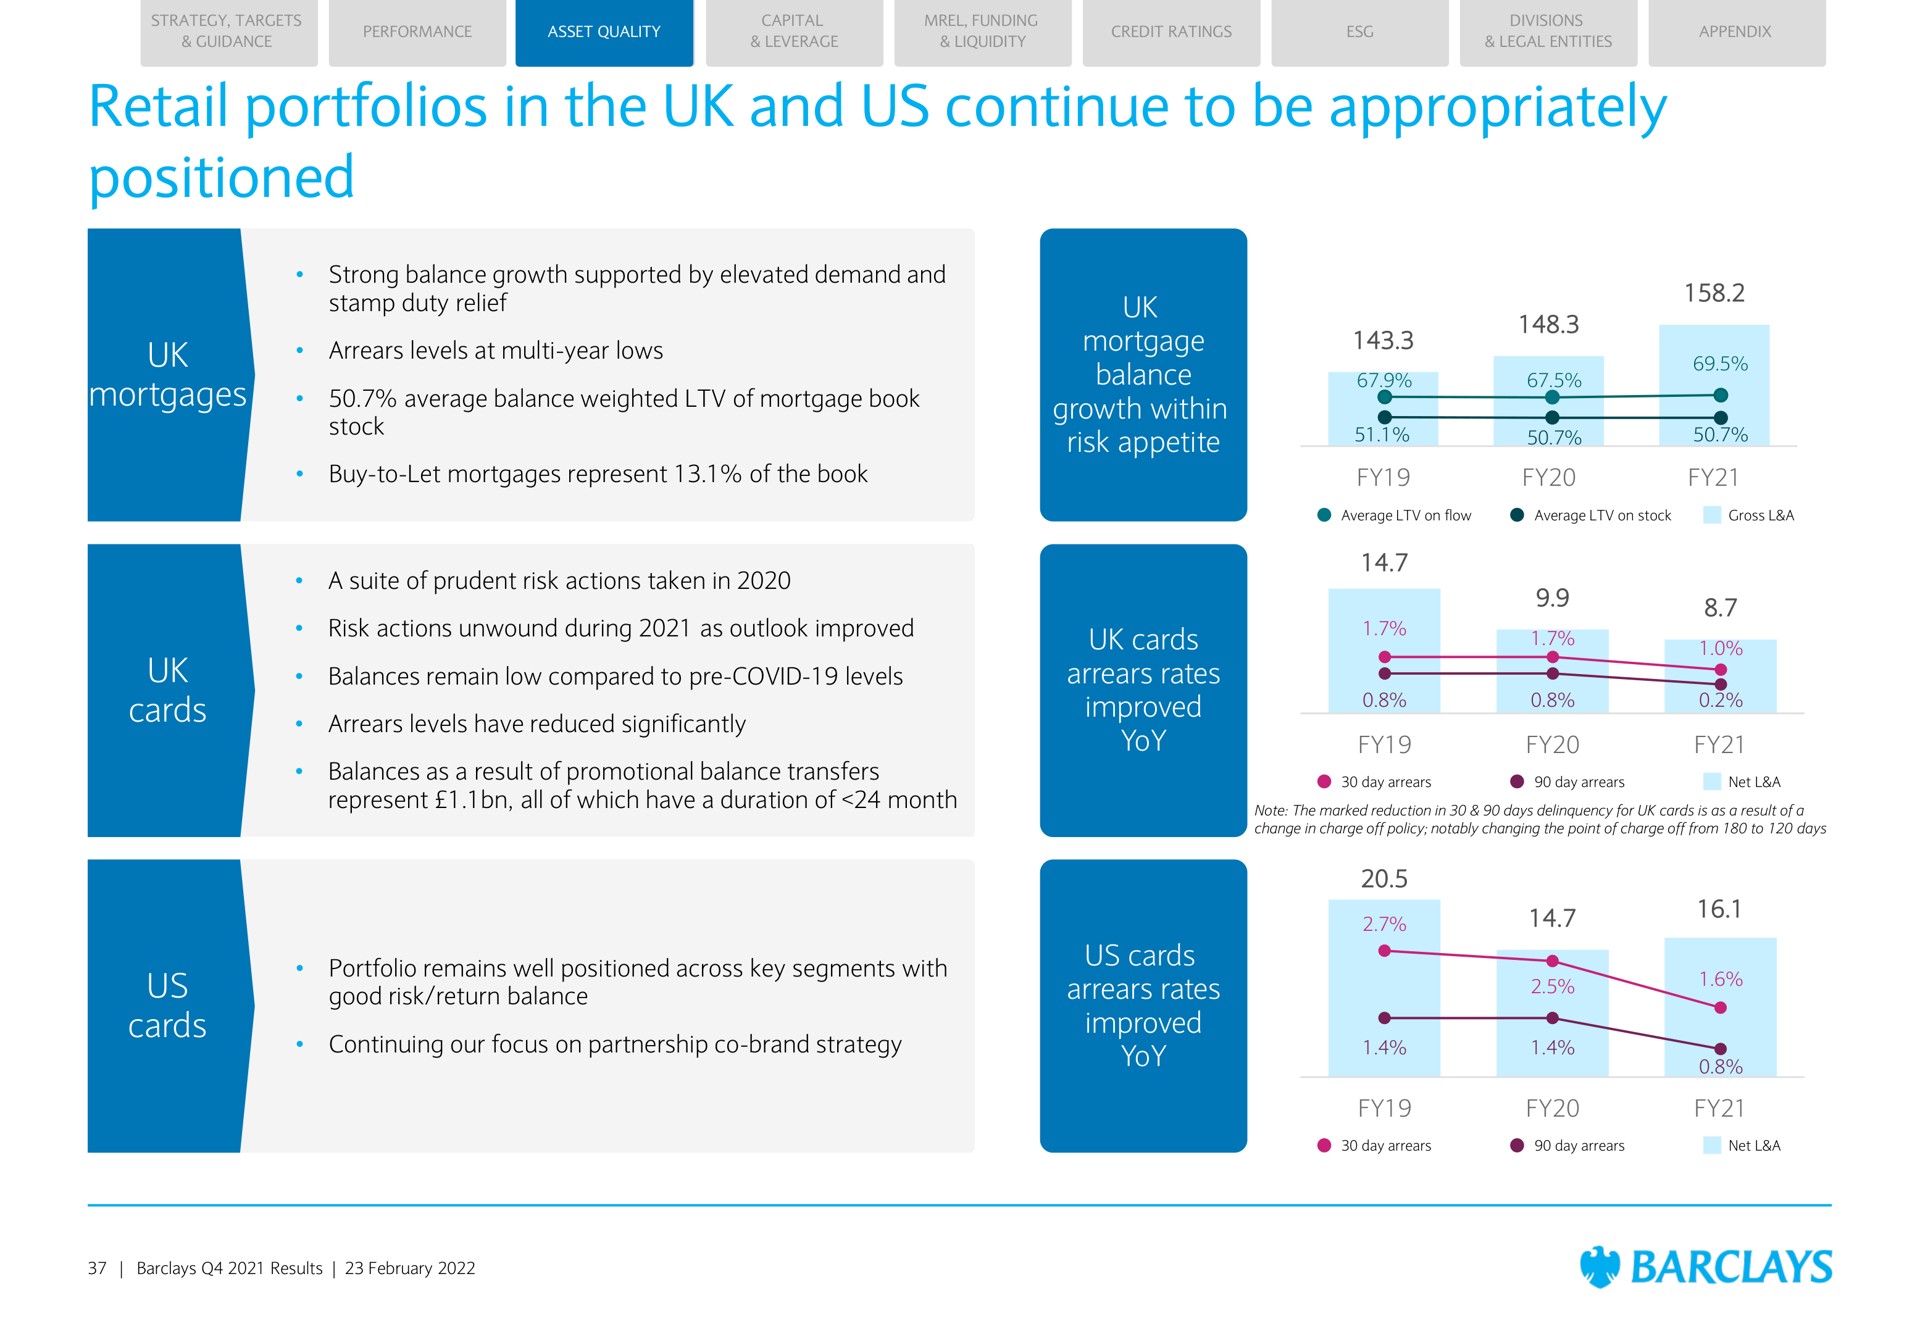 retail portfolios in the and us continue to be appropriately positioned mortgages mortgage balance growth within risk appetite cards us cards cards rates improved yoy us cards rates improved yoy ais | Barclays